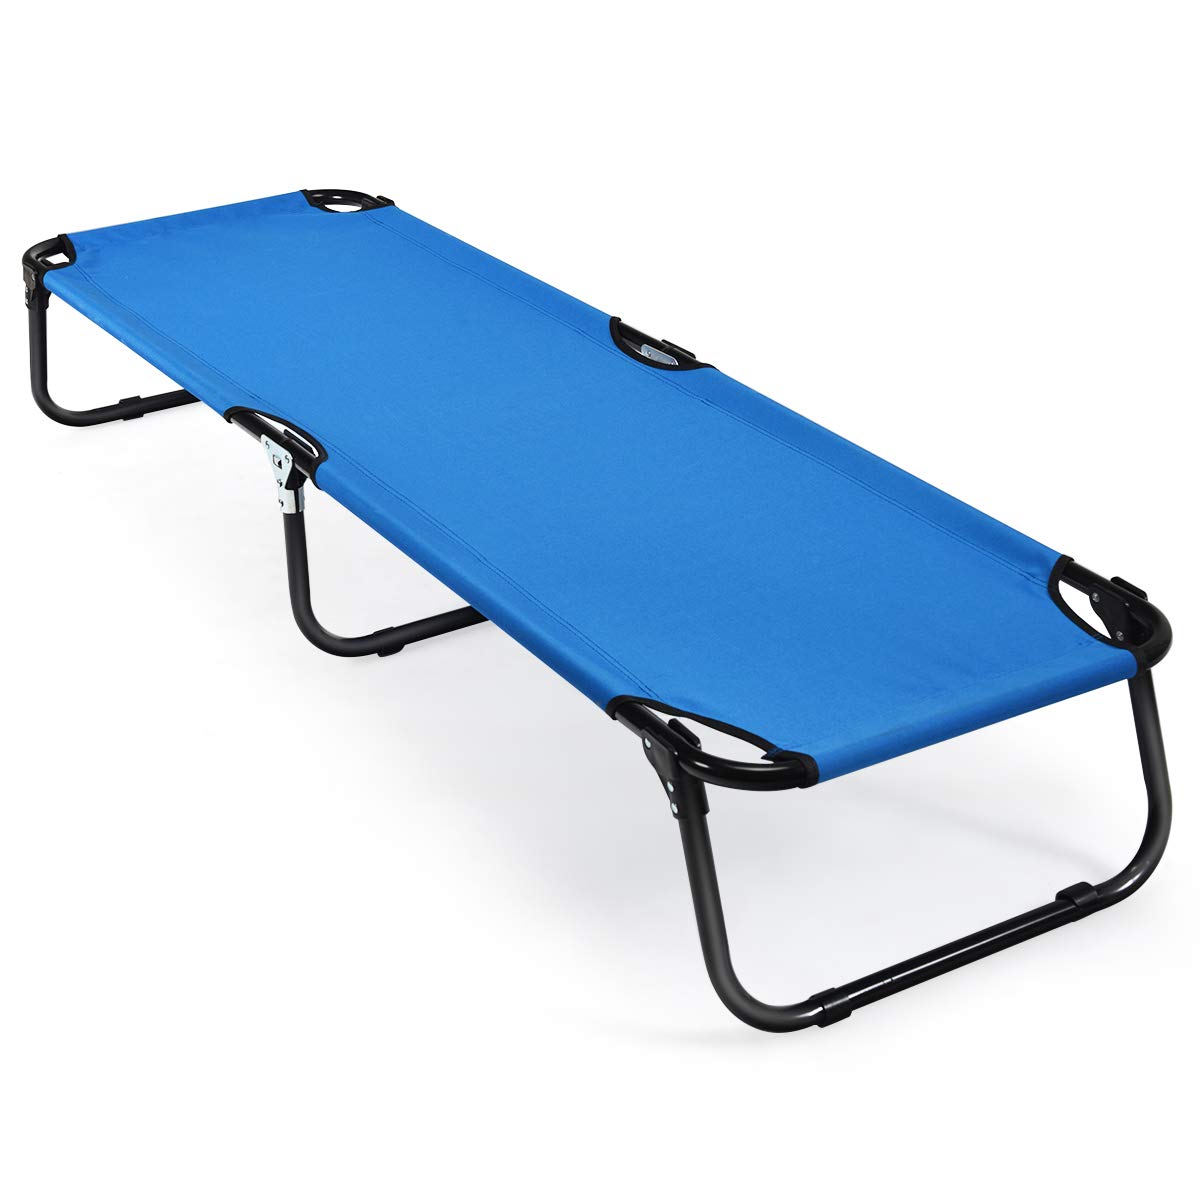 Folding Camping Cot, Heavy Duty Collapsible Foldable Bed - GoplusUS